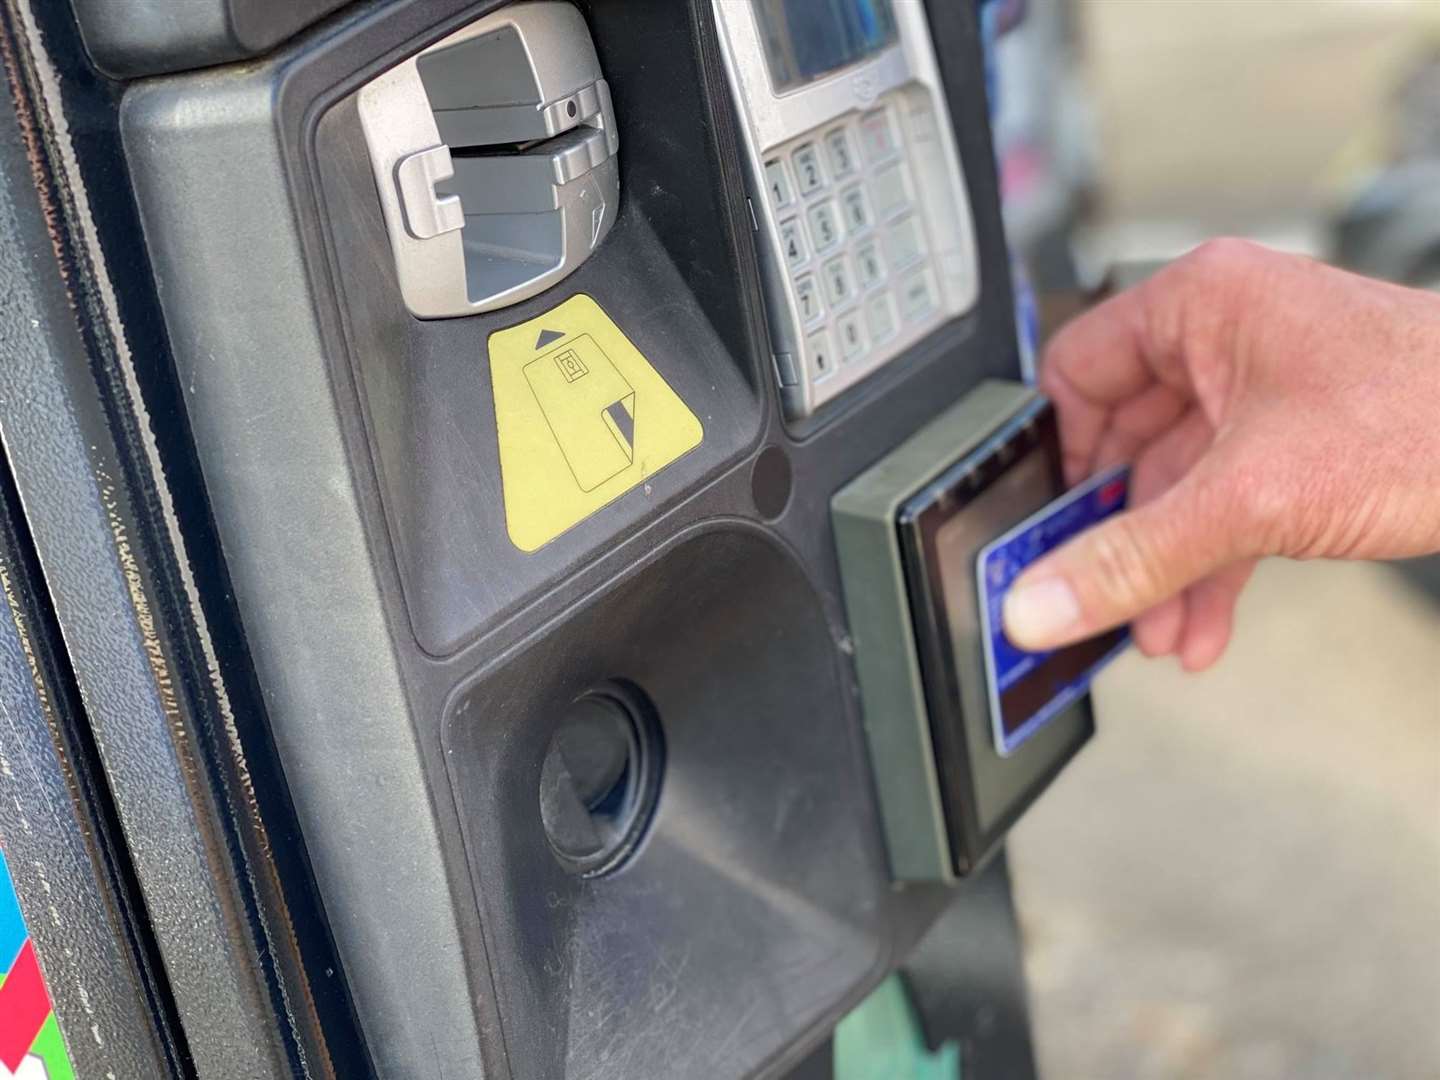 There are plans to move fully cashless in the next 18 months. Photo: Sue Ferguson